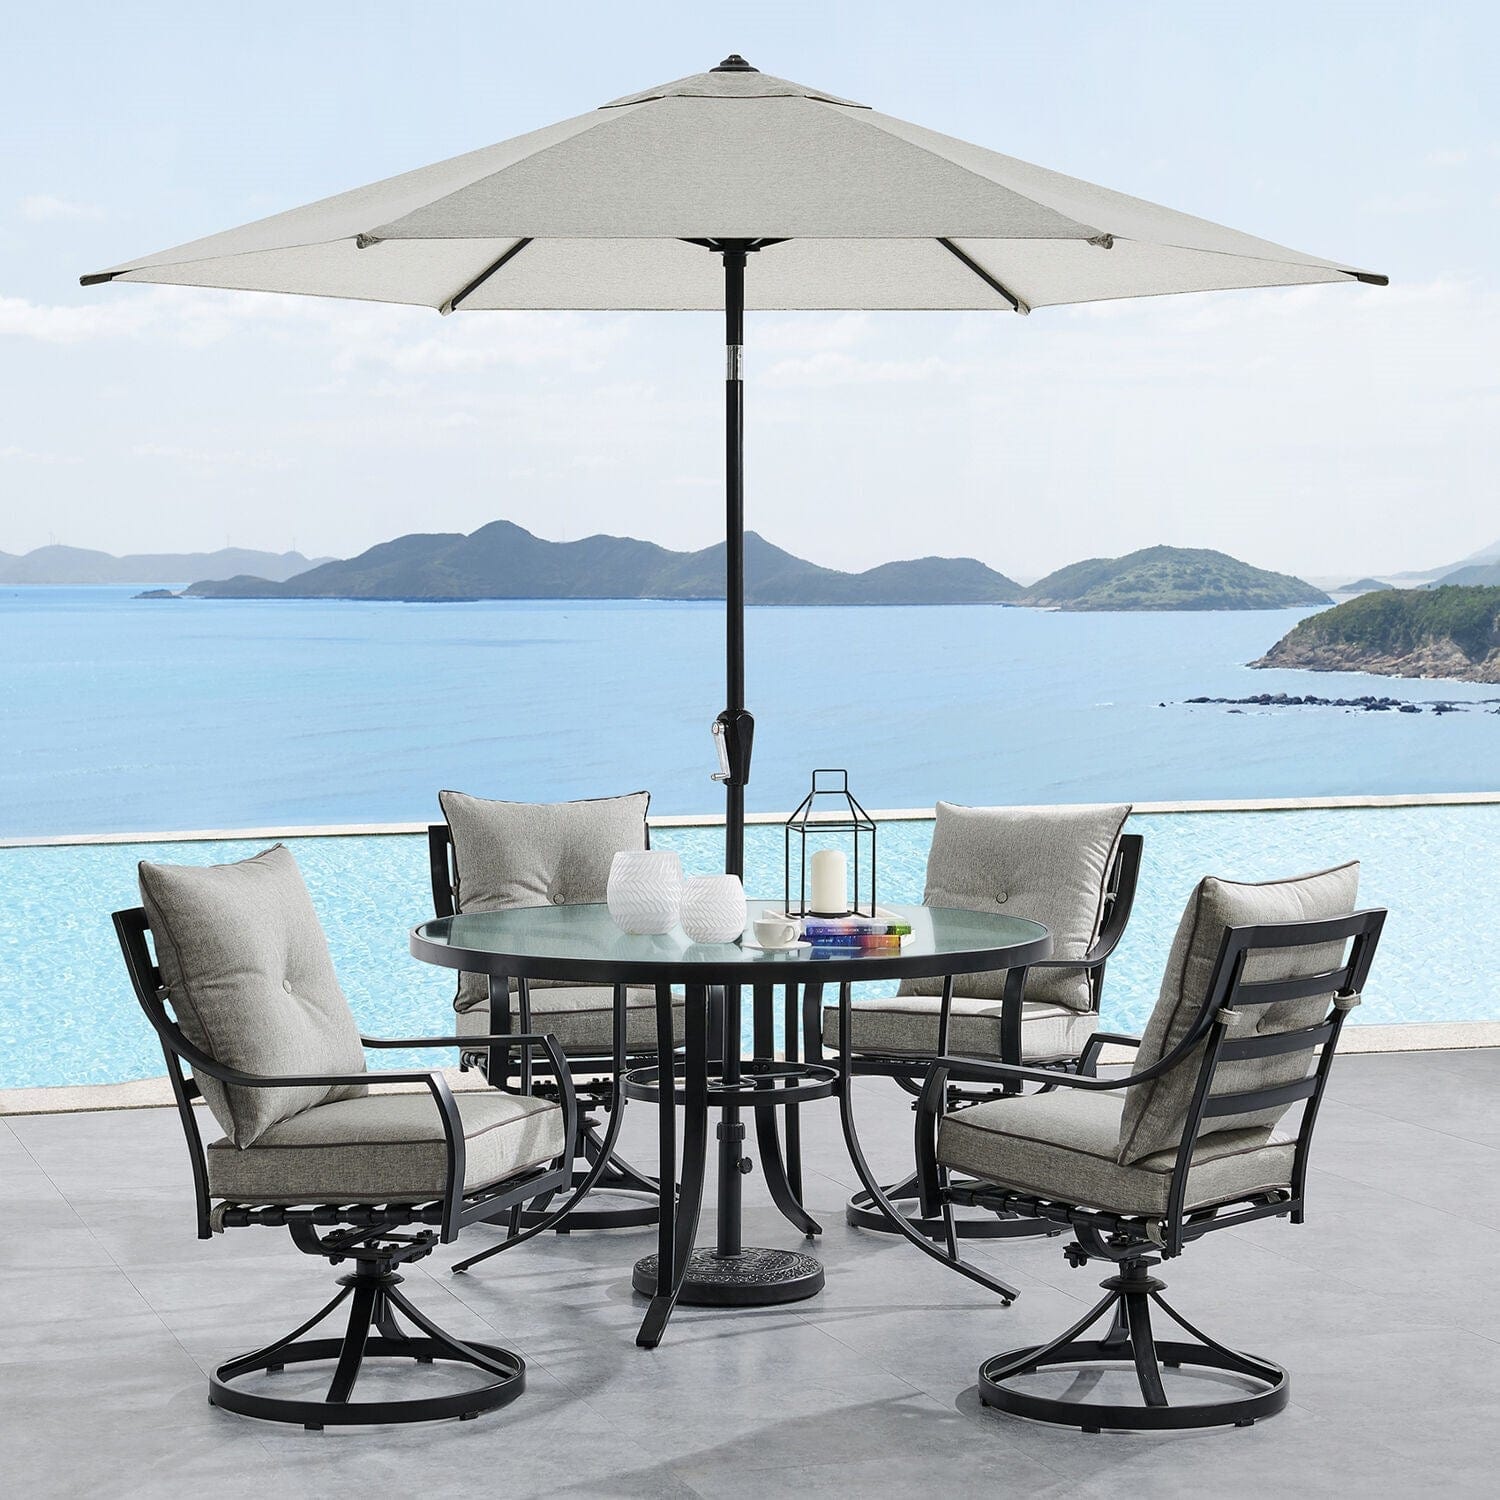 Hanover Outdoor Dining Set Hanover Lavallette 5-Piece Dining Set in Silver Linings with 4 Swivel Rockers, 52-In. Round Glass-Top Table, Umbrella, and Base | LAVDN5PCSWRD-SLV-SU